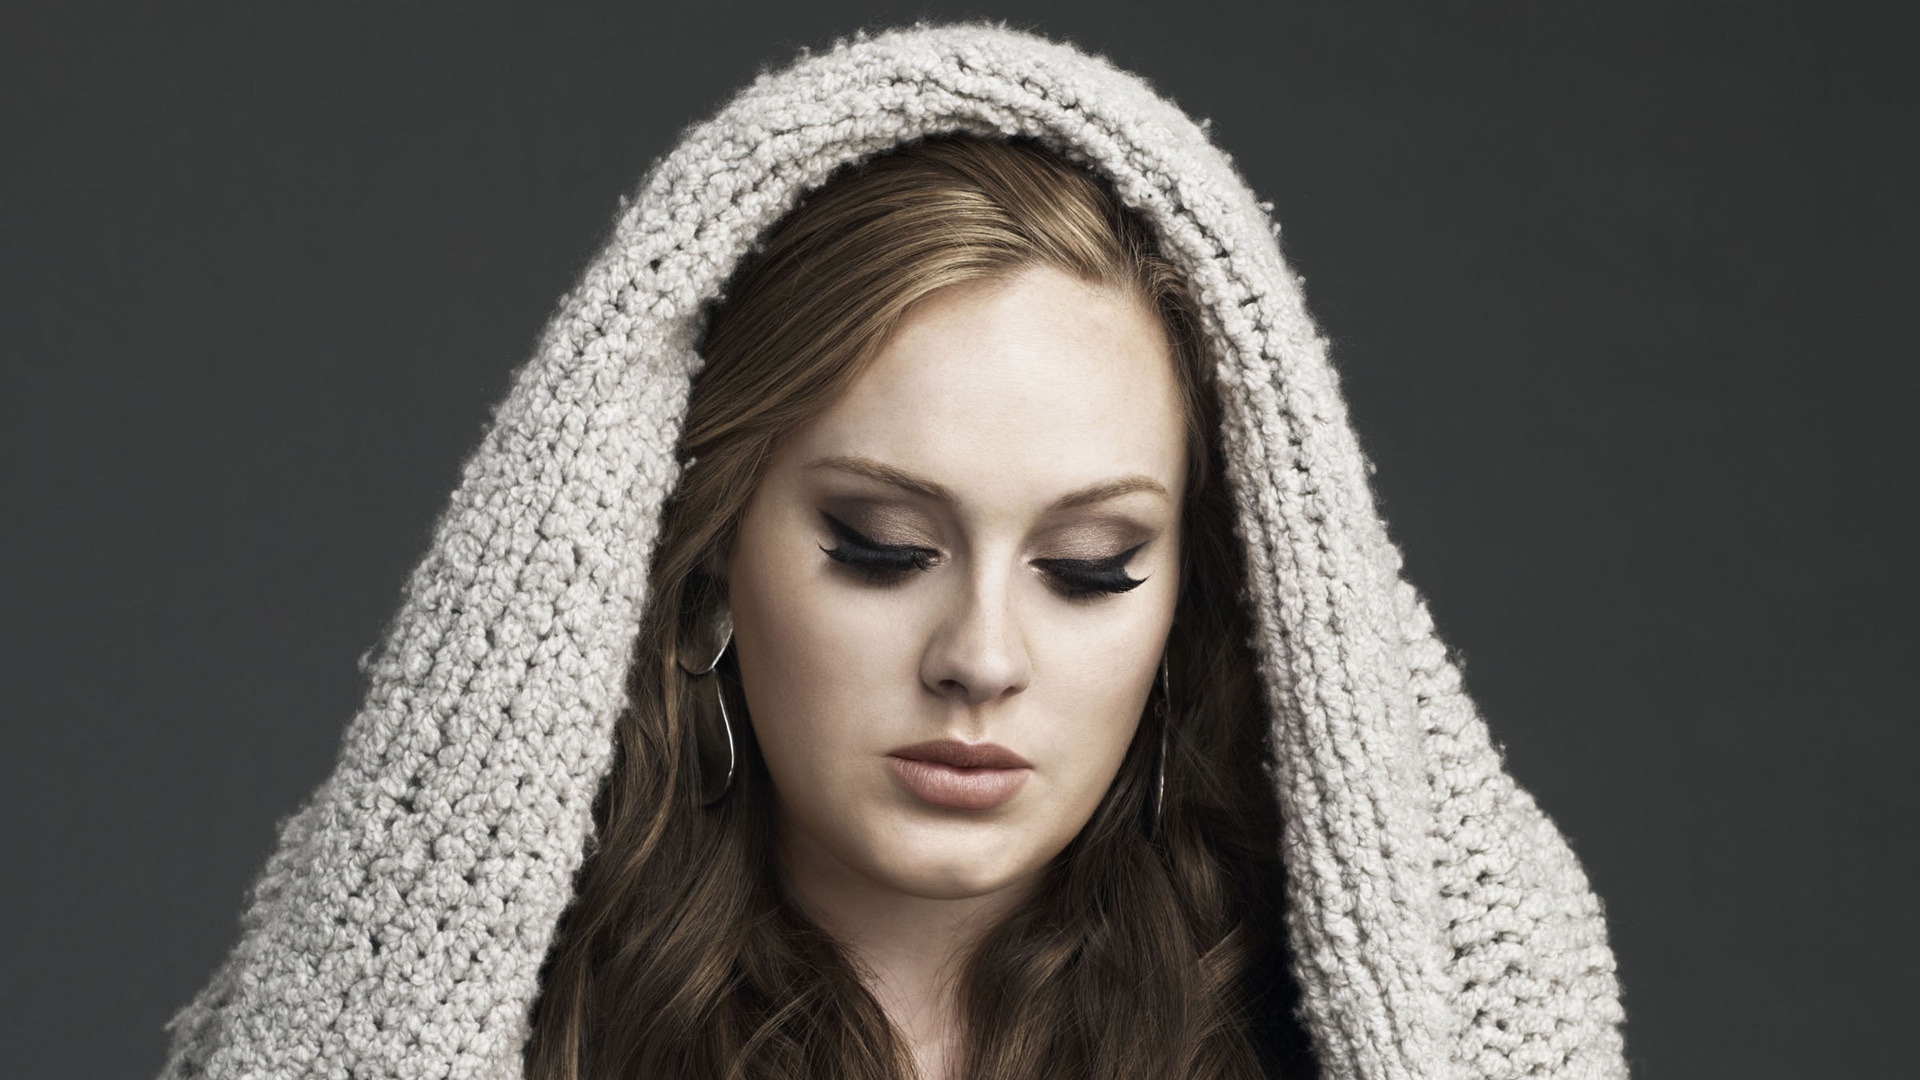 Beautiful Adele for 1920 x 1080 HDTV 1080p resolution